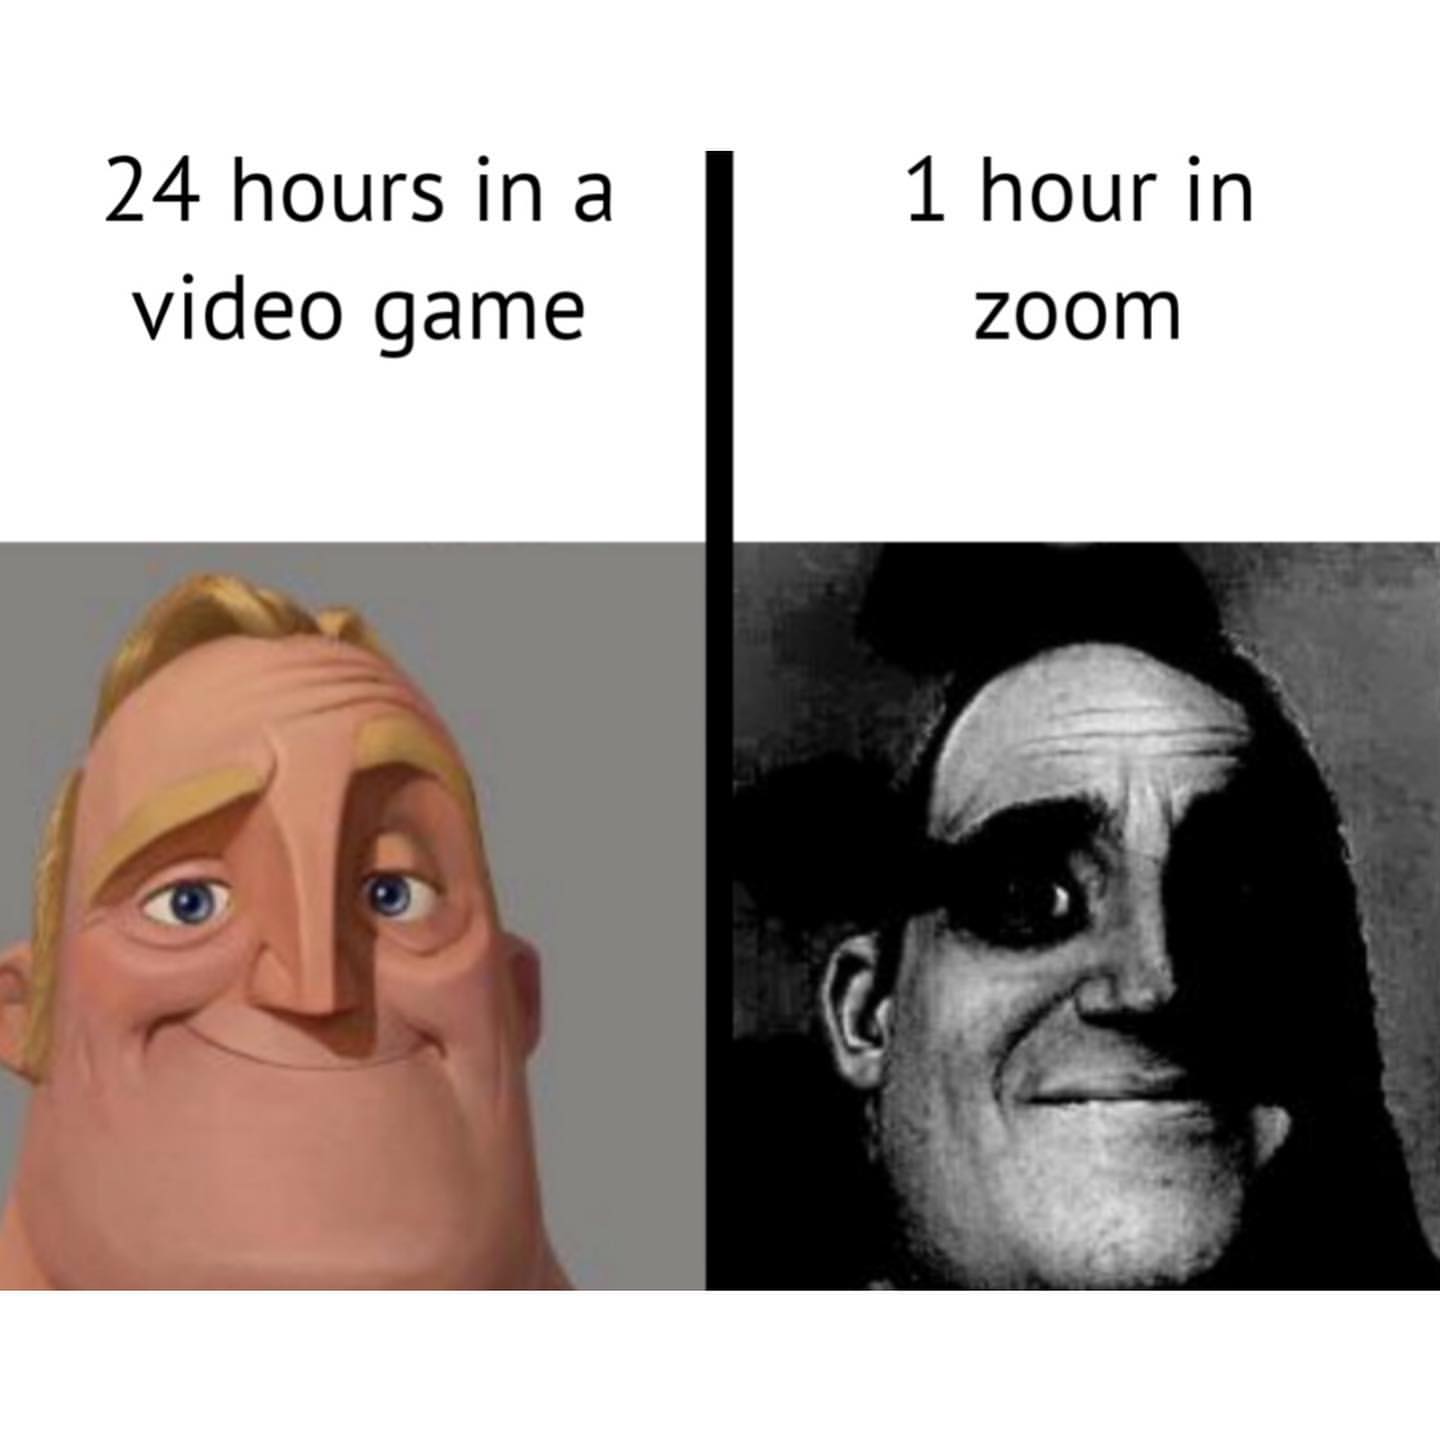 24 hours in a video game. 1 hour in zoom.